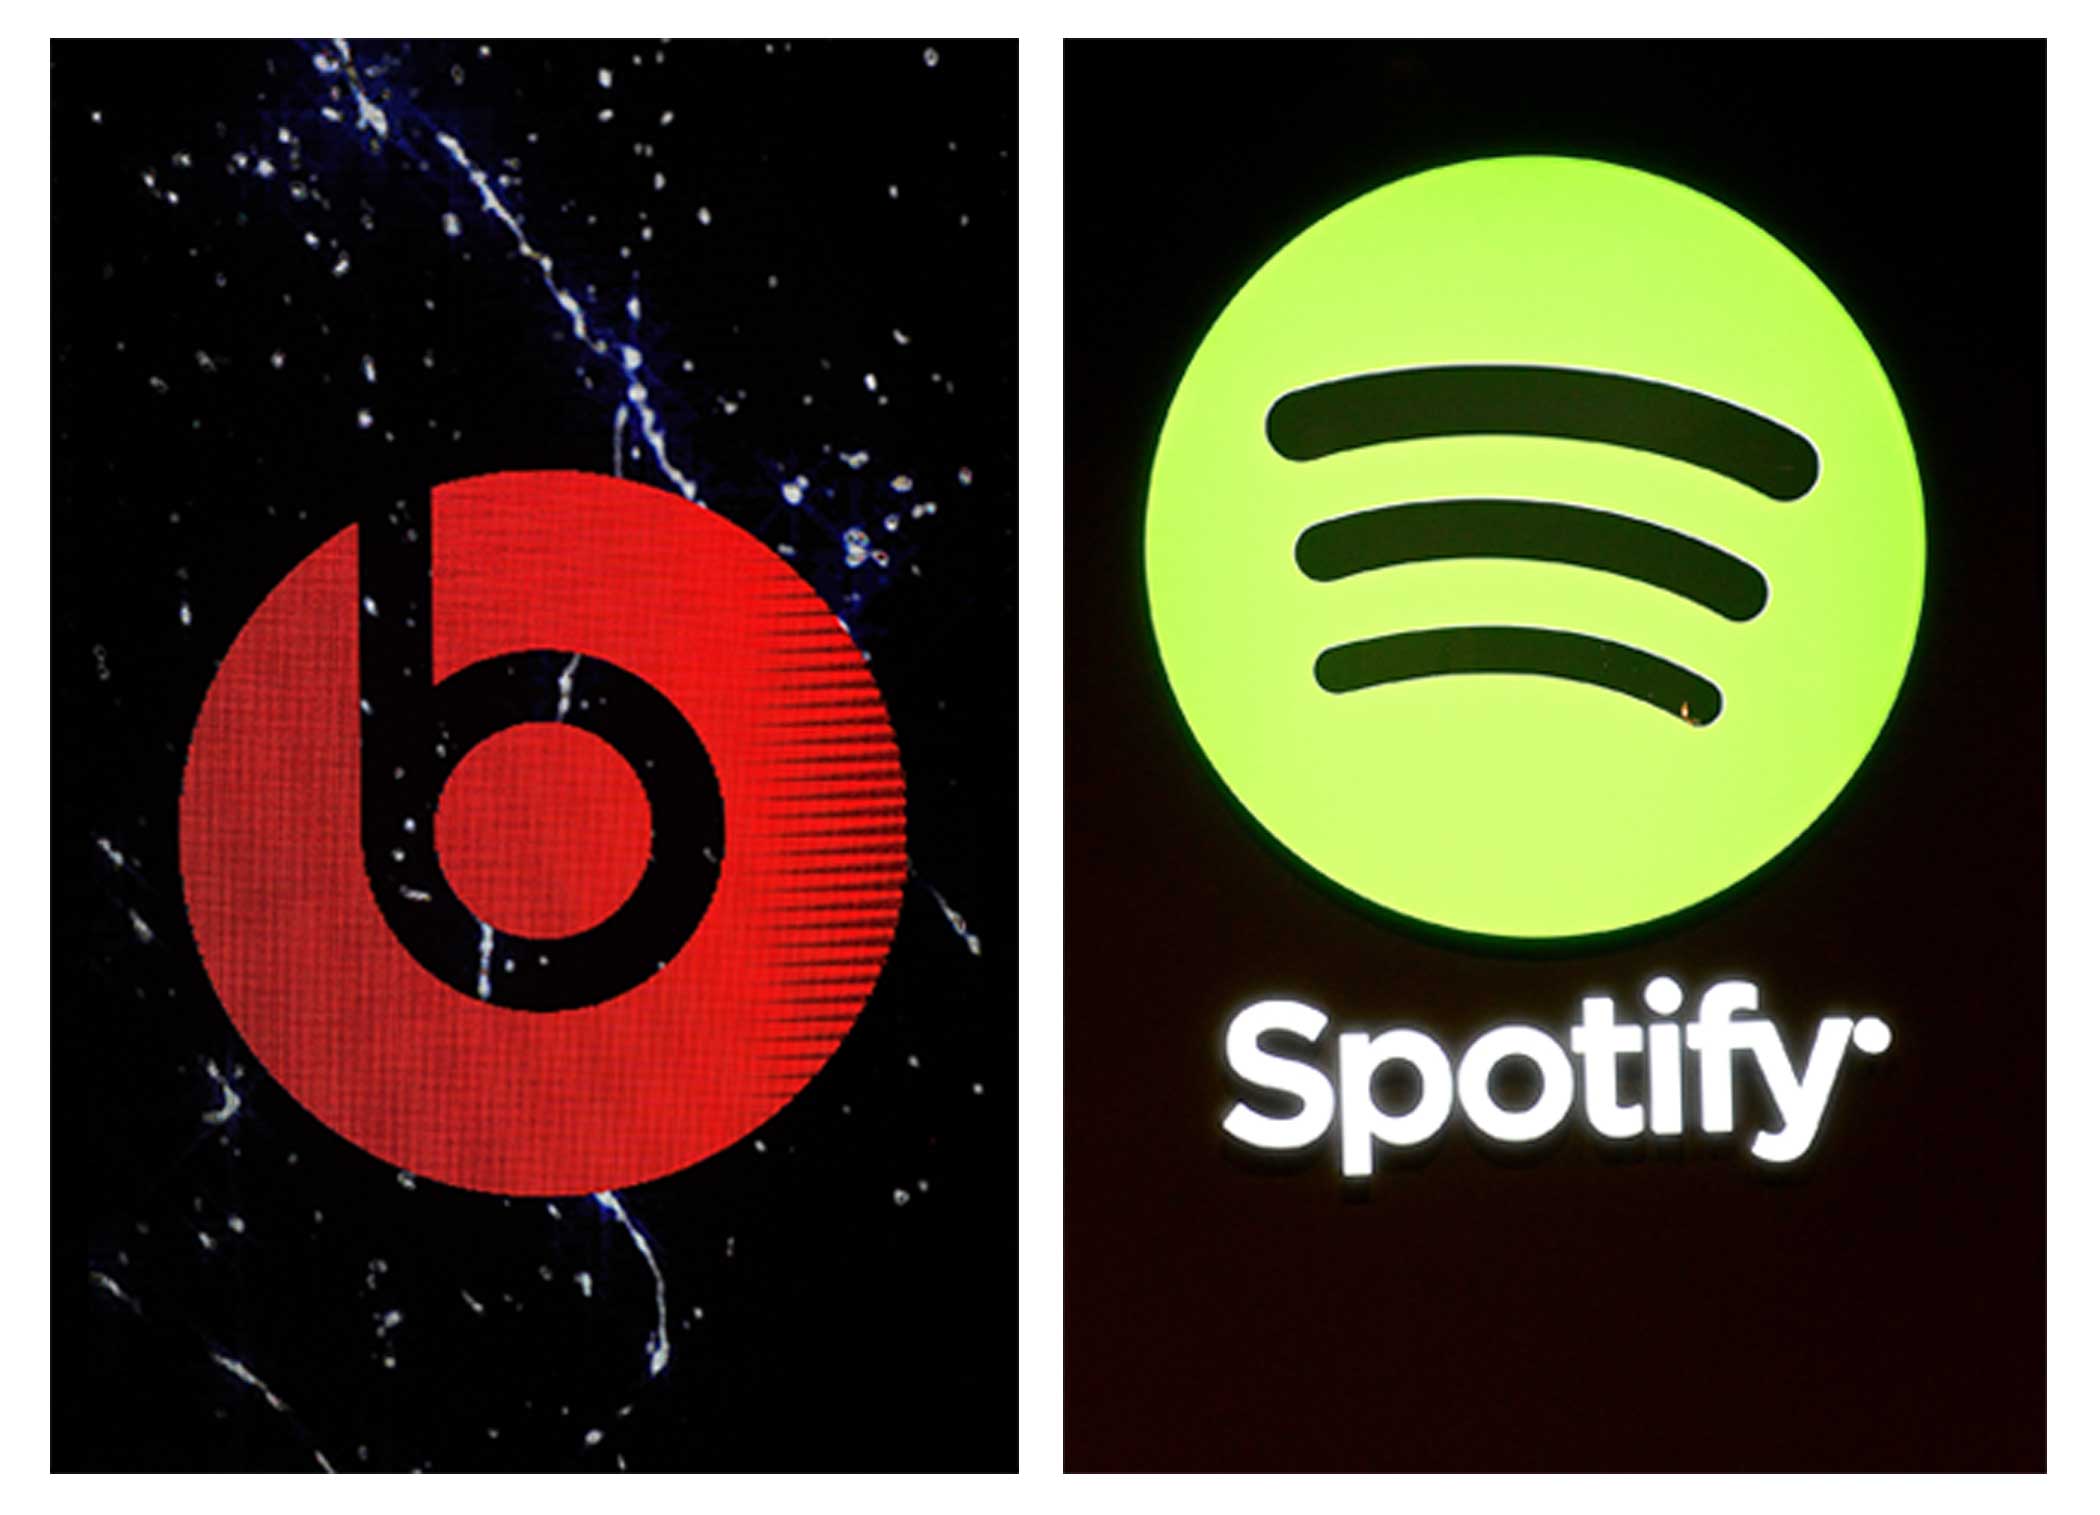 Beats By Dre and Spotify logos